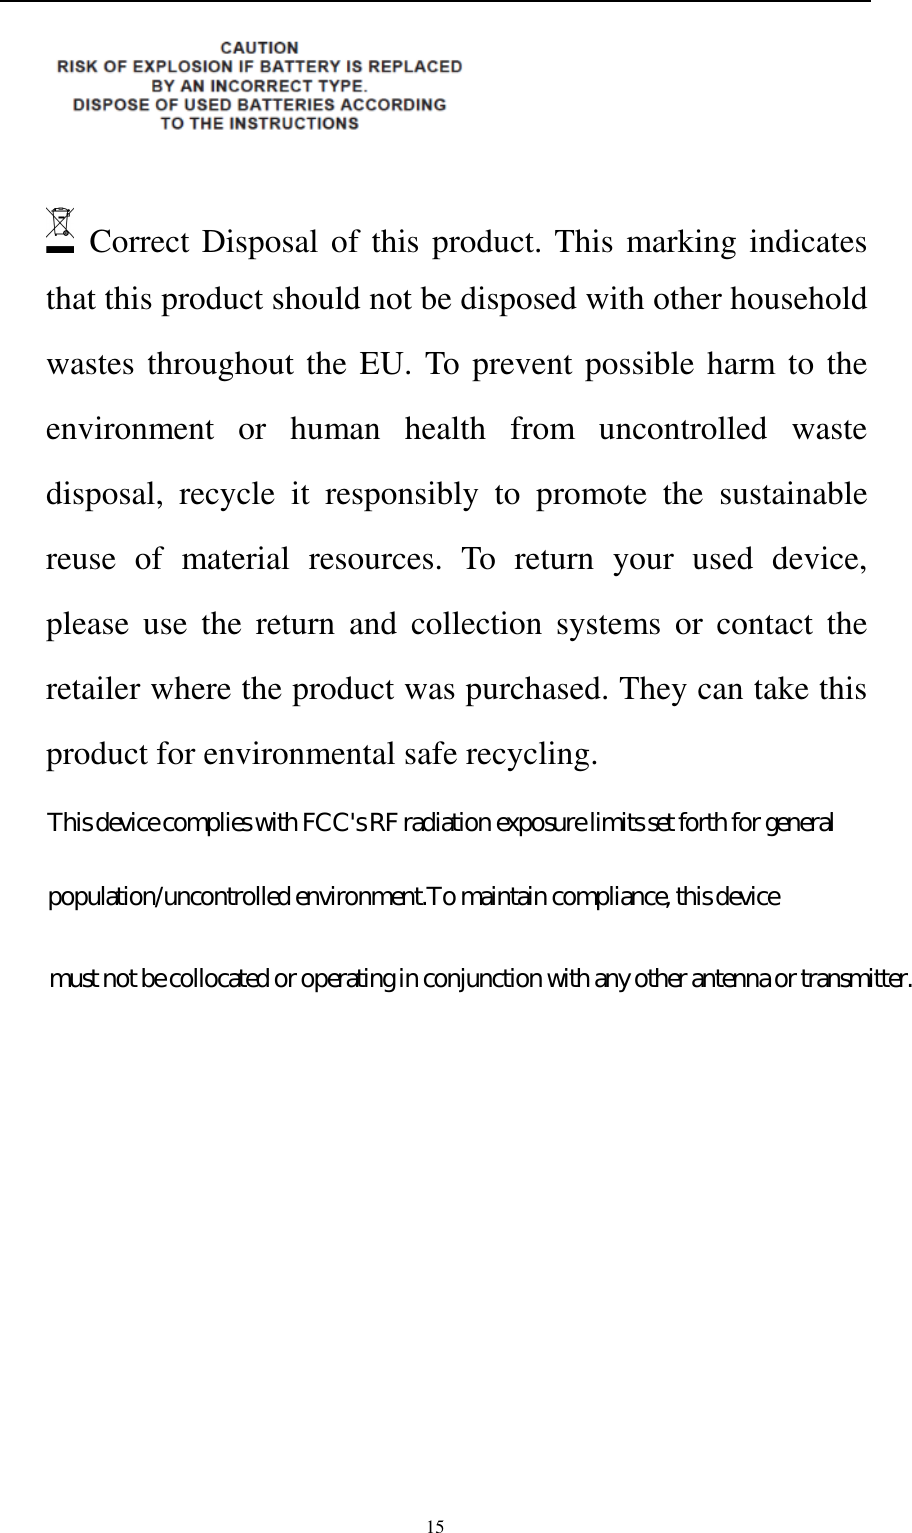    15     Correct Disposal of this product. This marking indicates that this product should not be disposed with other household wastes throughout the EU. To prevent possible harm to the environment  or  human  health  from  uncontrolled  waste disposal,  recycle  it  responsibly  to  promote  the  sustainable reuse  of  material  resources.  To  return  your  used  device, please  use  the  return  and  collection  systems  or  contact  the retailer where the product was purchased. They can take this product for environmental safe recycling.   This device complies with FCC&apos;s RF radiation exposure limits set forth for generalpopulation/uncontrolled environment.To maintain compliance, this devicemust not be collocated or operating in conjunction with any other antenna or transmitter.